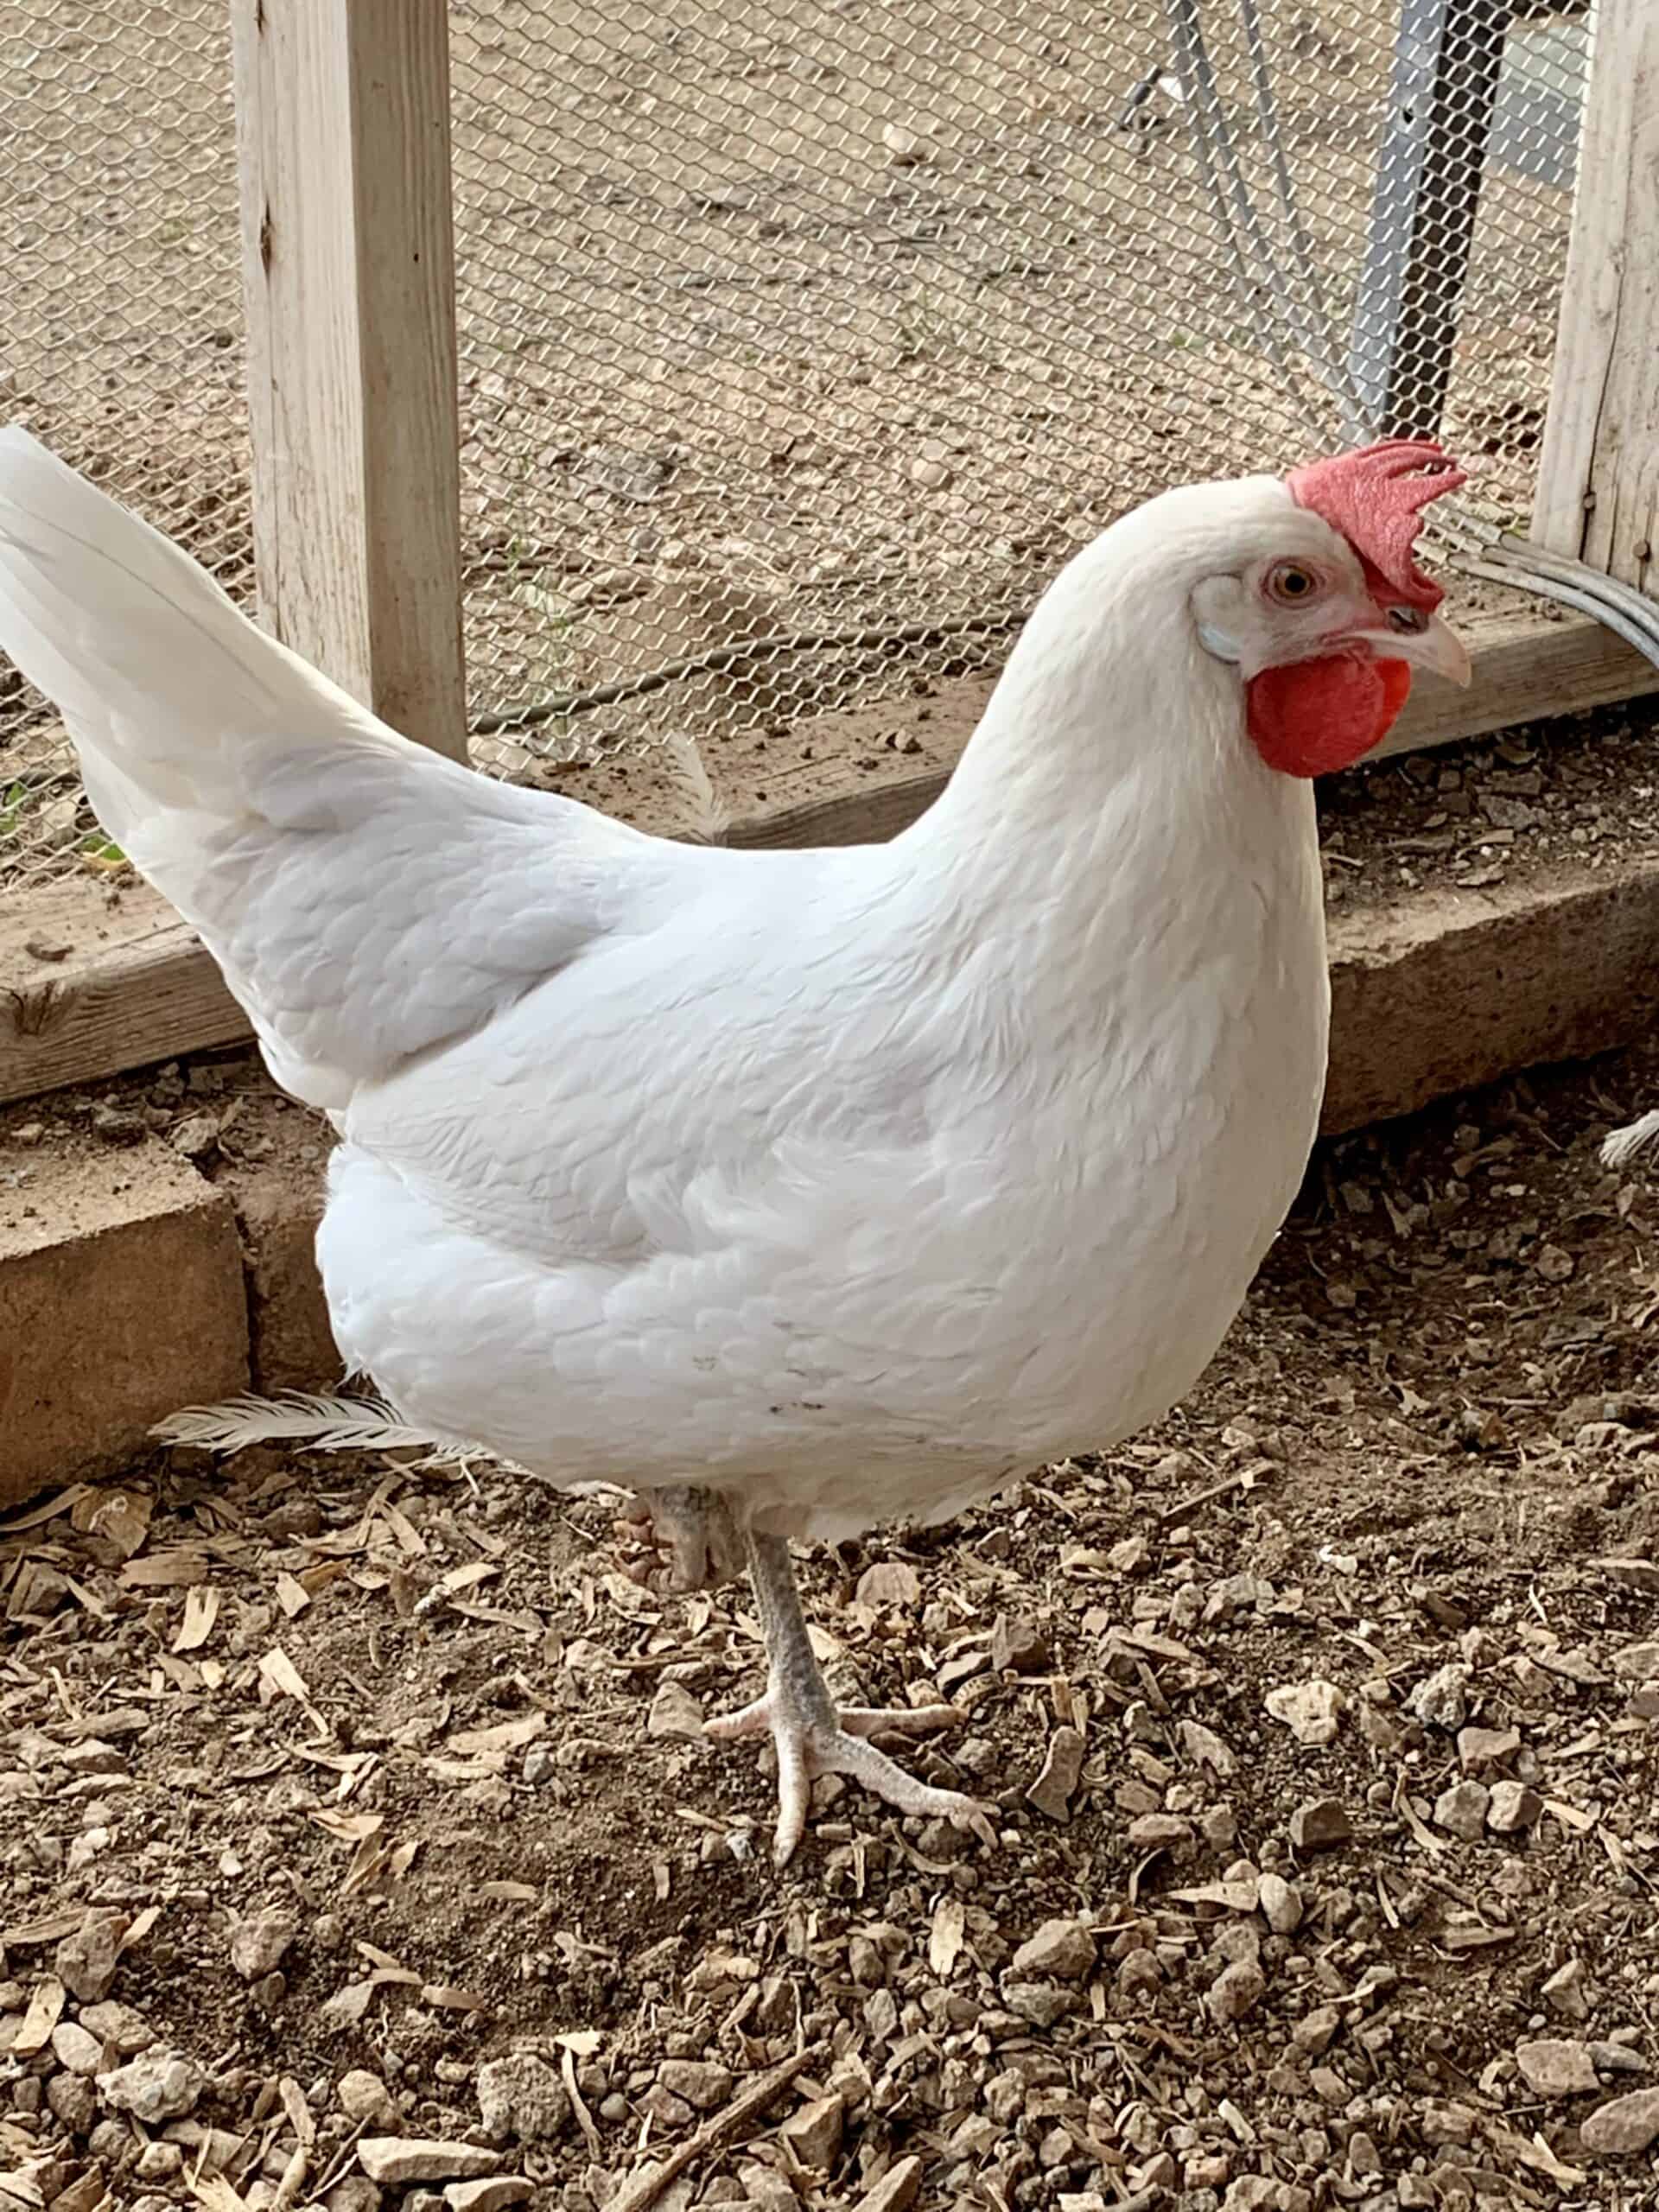 Things to Consider Before Raising Chickens